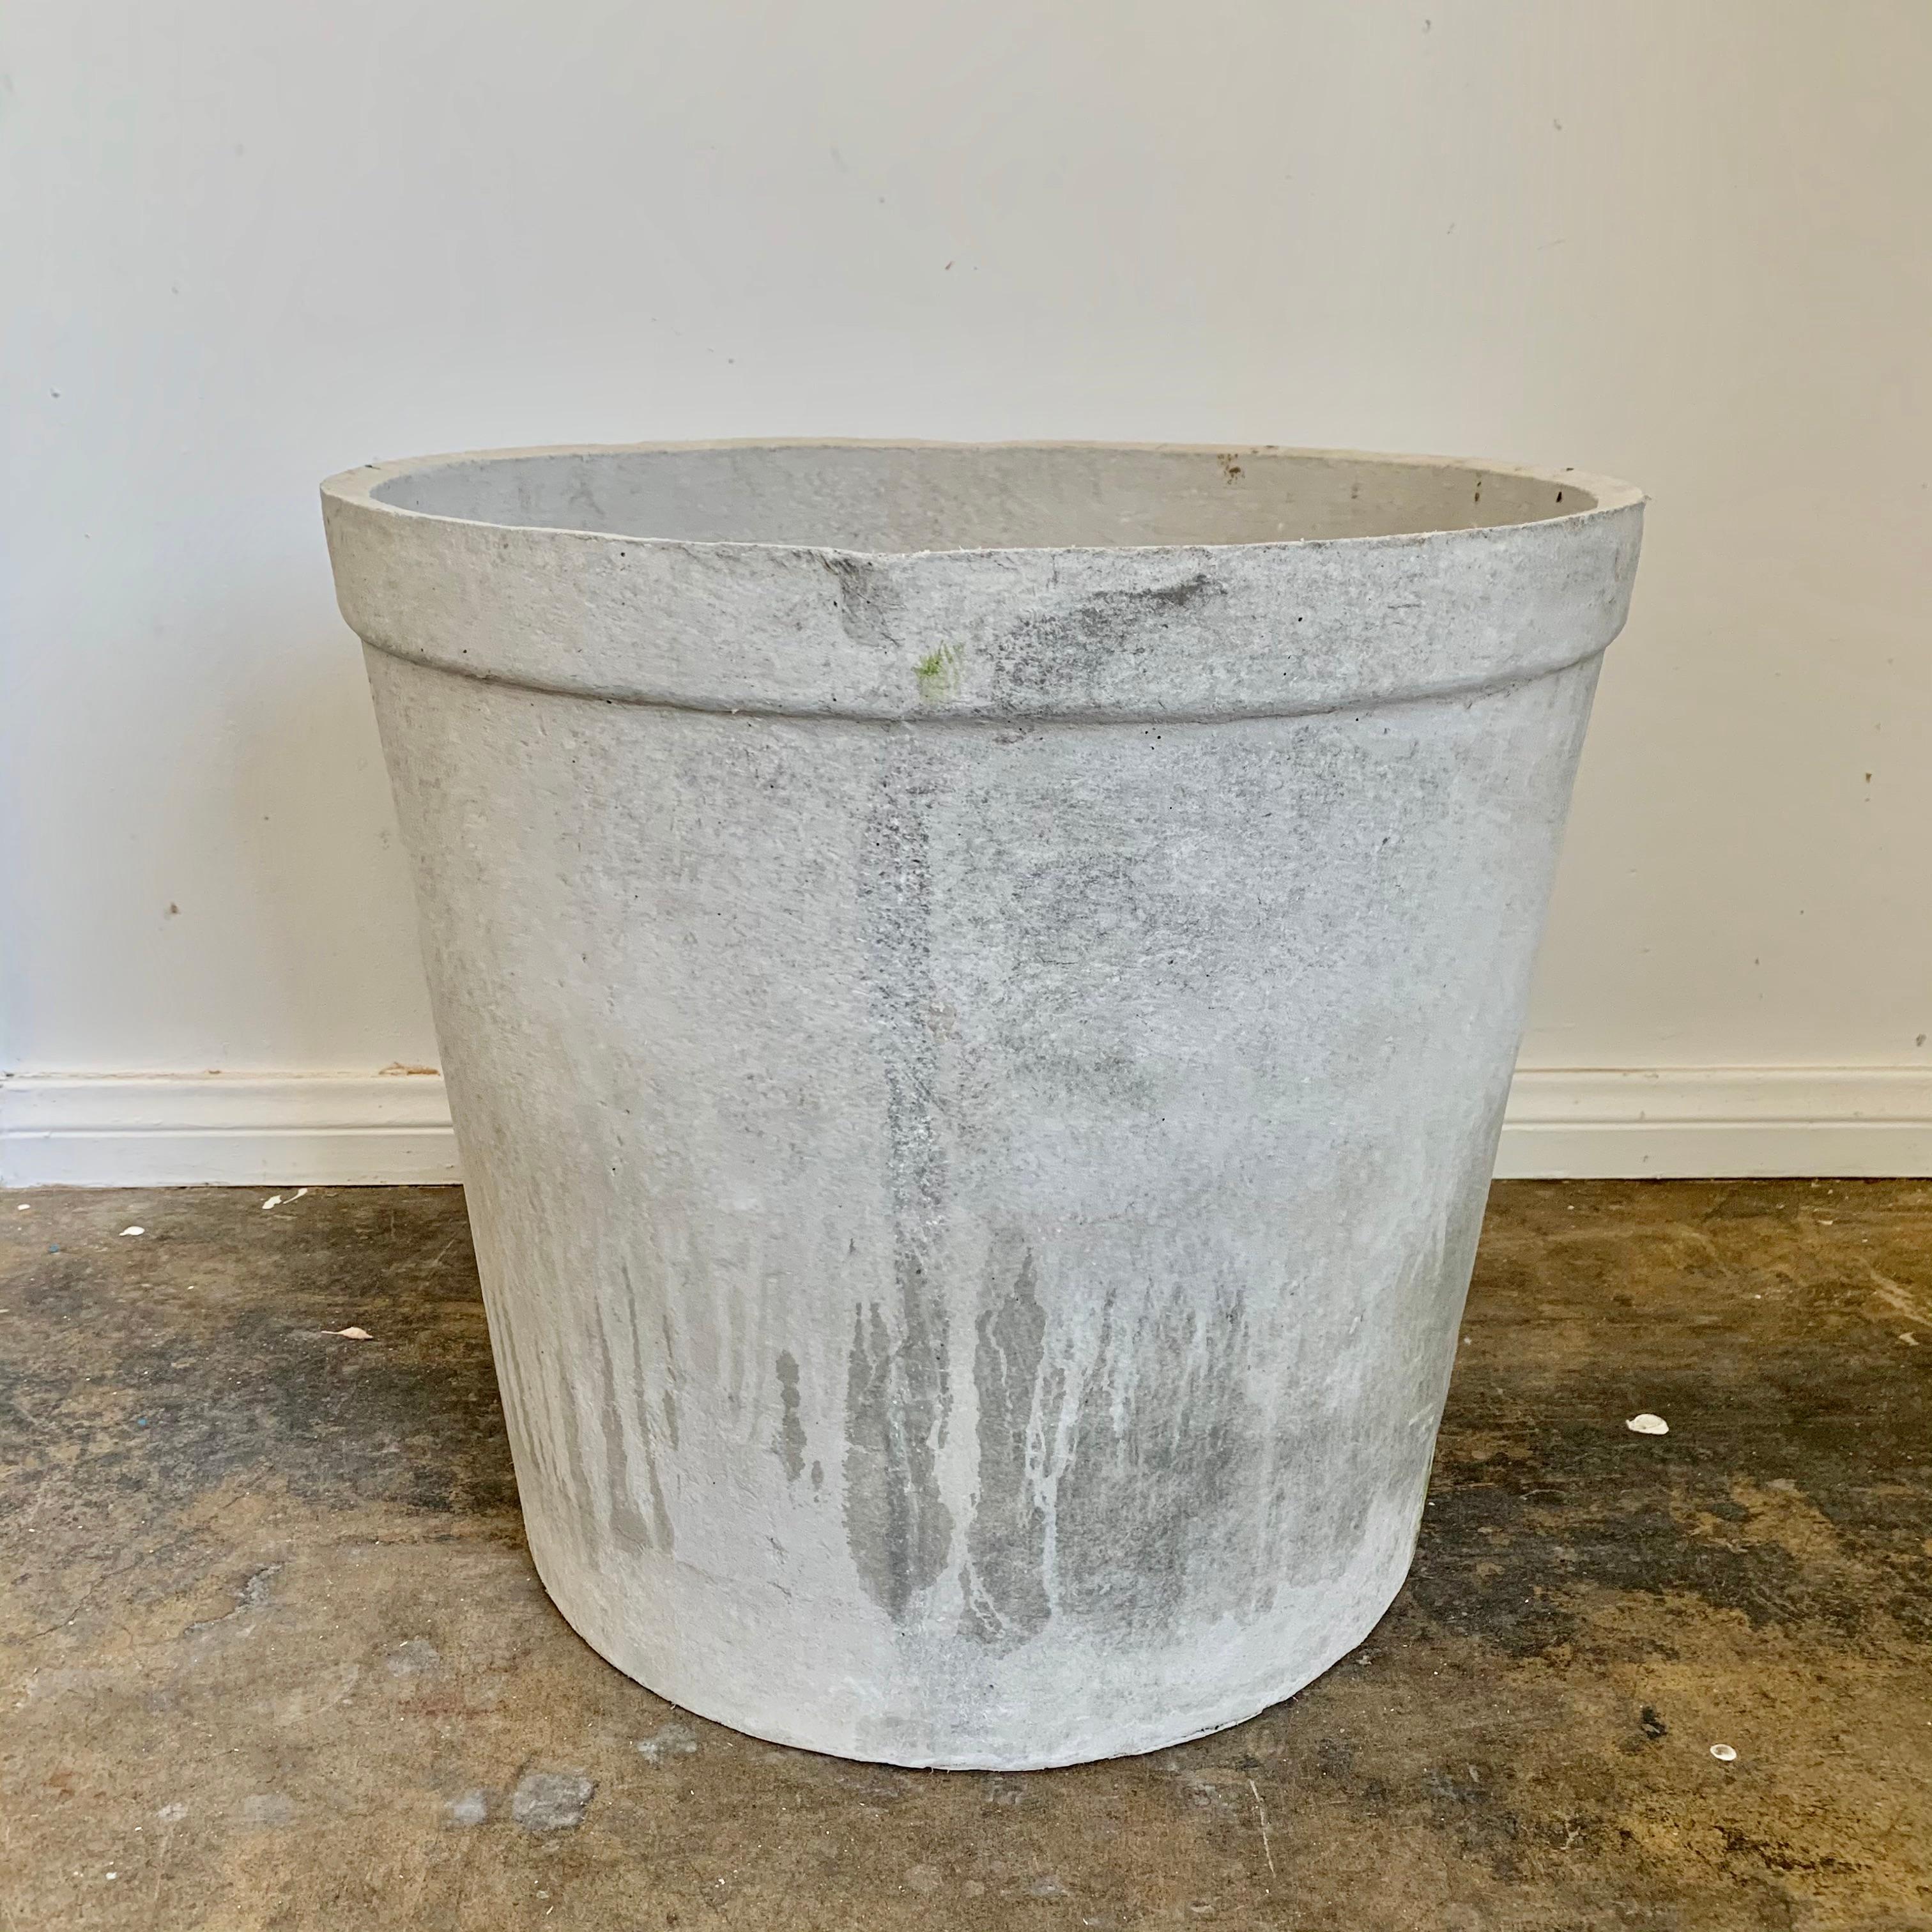 Unique planters by Willy Guhl in the shape of a trash bin. Lightly indented handles on both sides. Handmade in the 1960s. Large size. Fun sculptural piece. 4 matching pieces available in this size. Great condition and patina. 
 


 

 